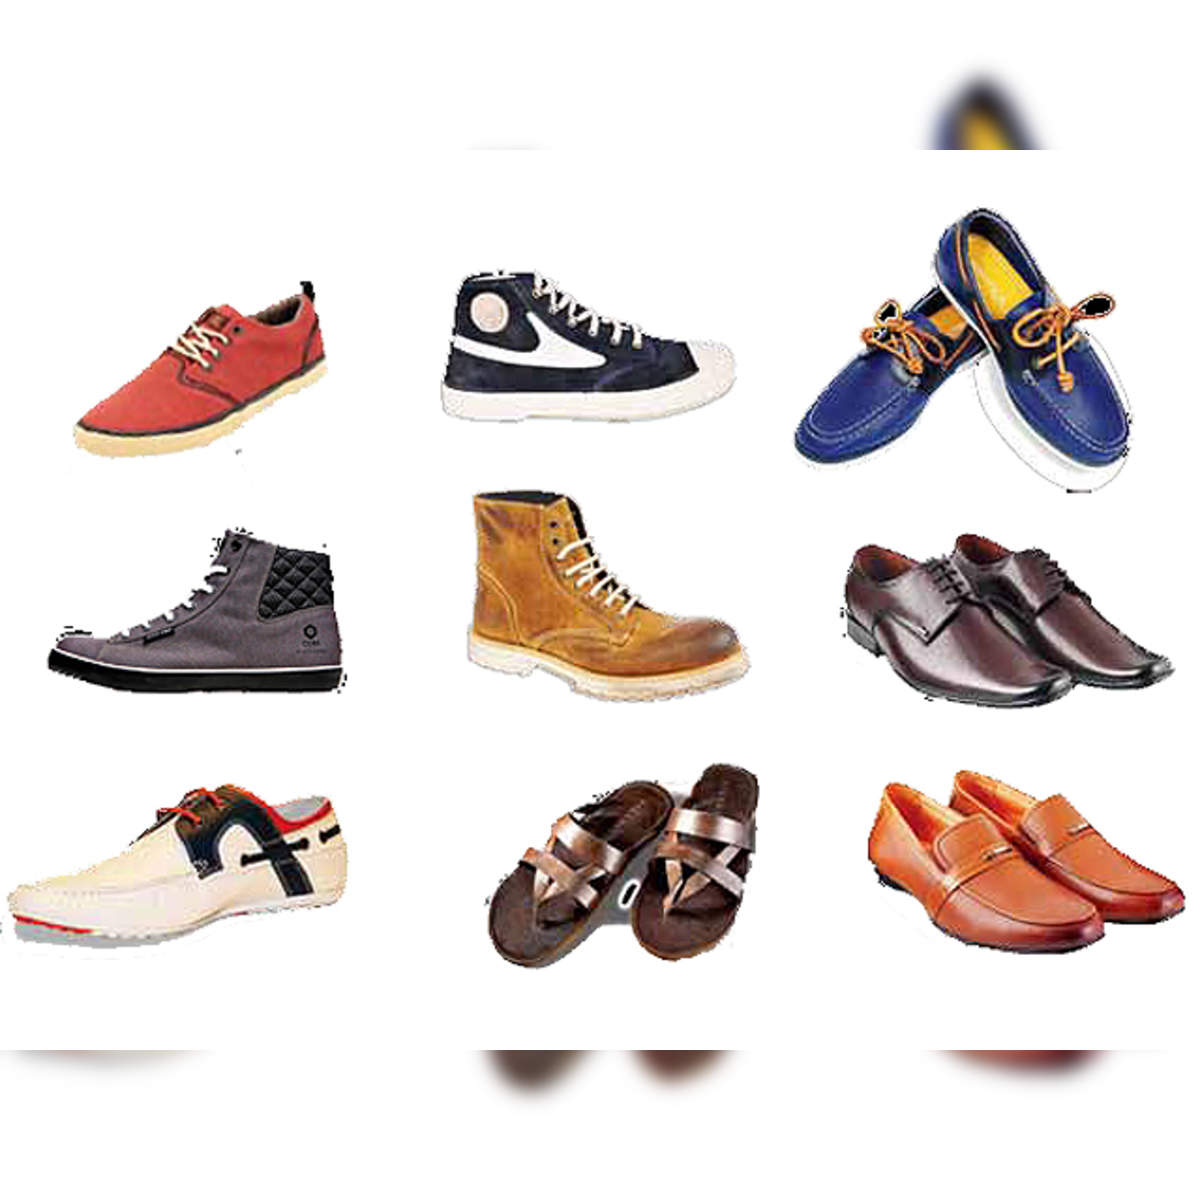 Mochi shoes are known for their quality and durability